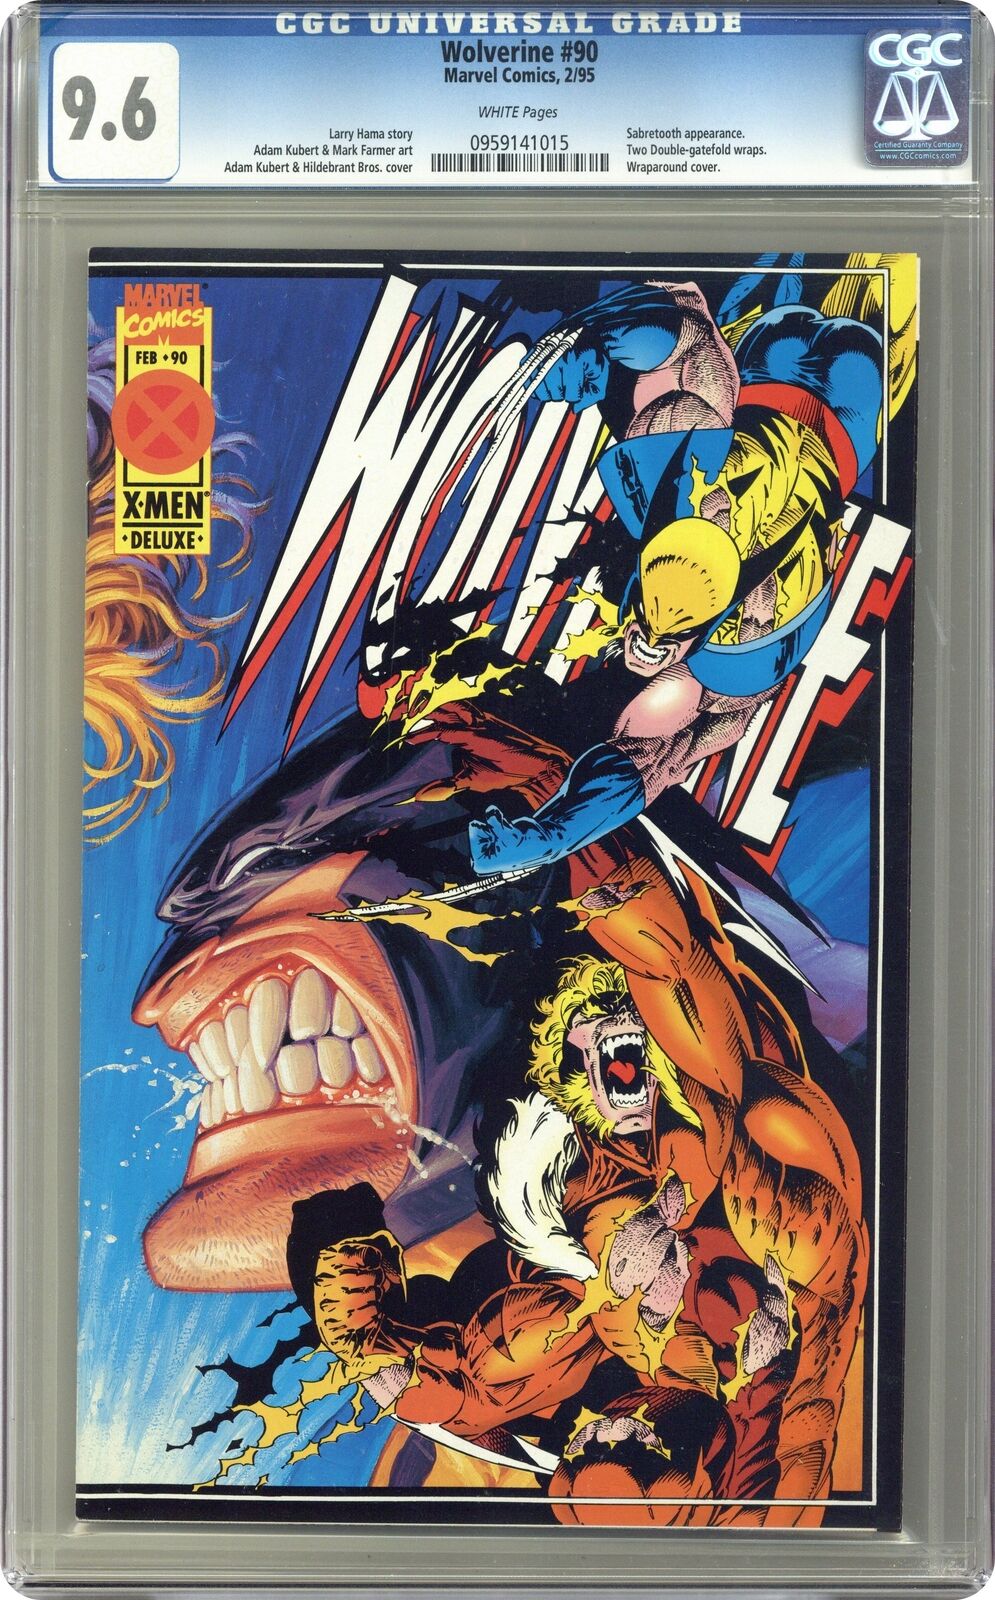 Wolverine #90 Kubert Deluxe Direct Variant w/o cards CGC 9.6 1995 0959141015